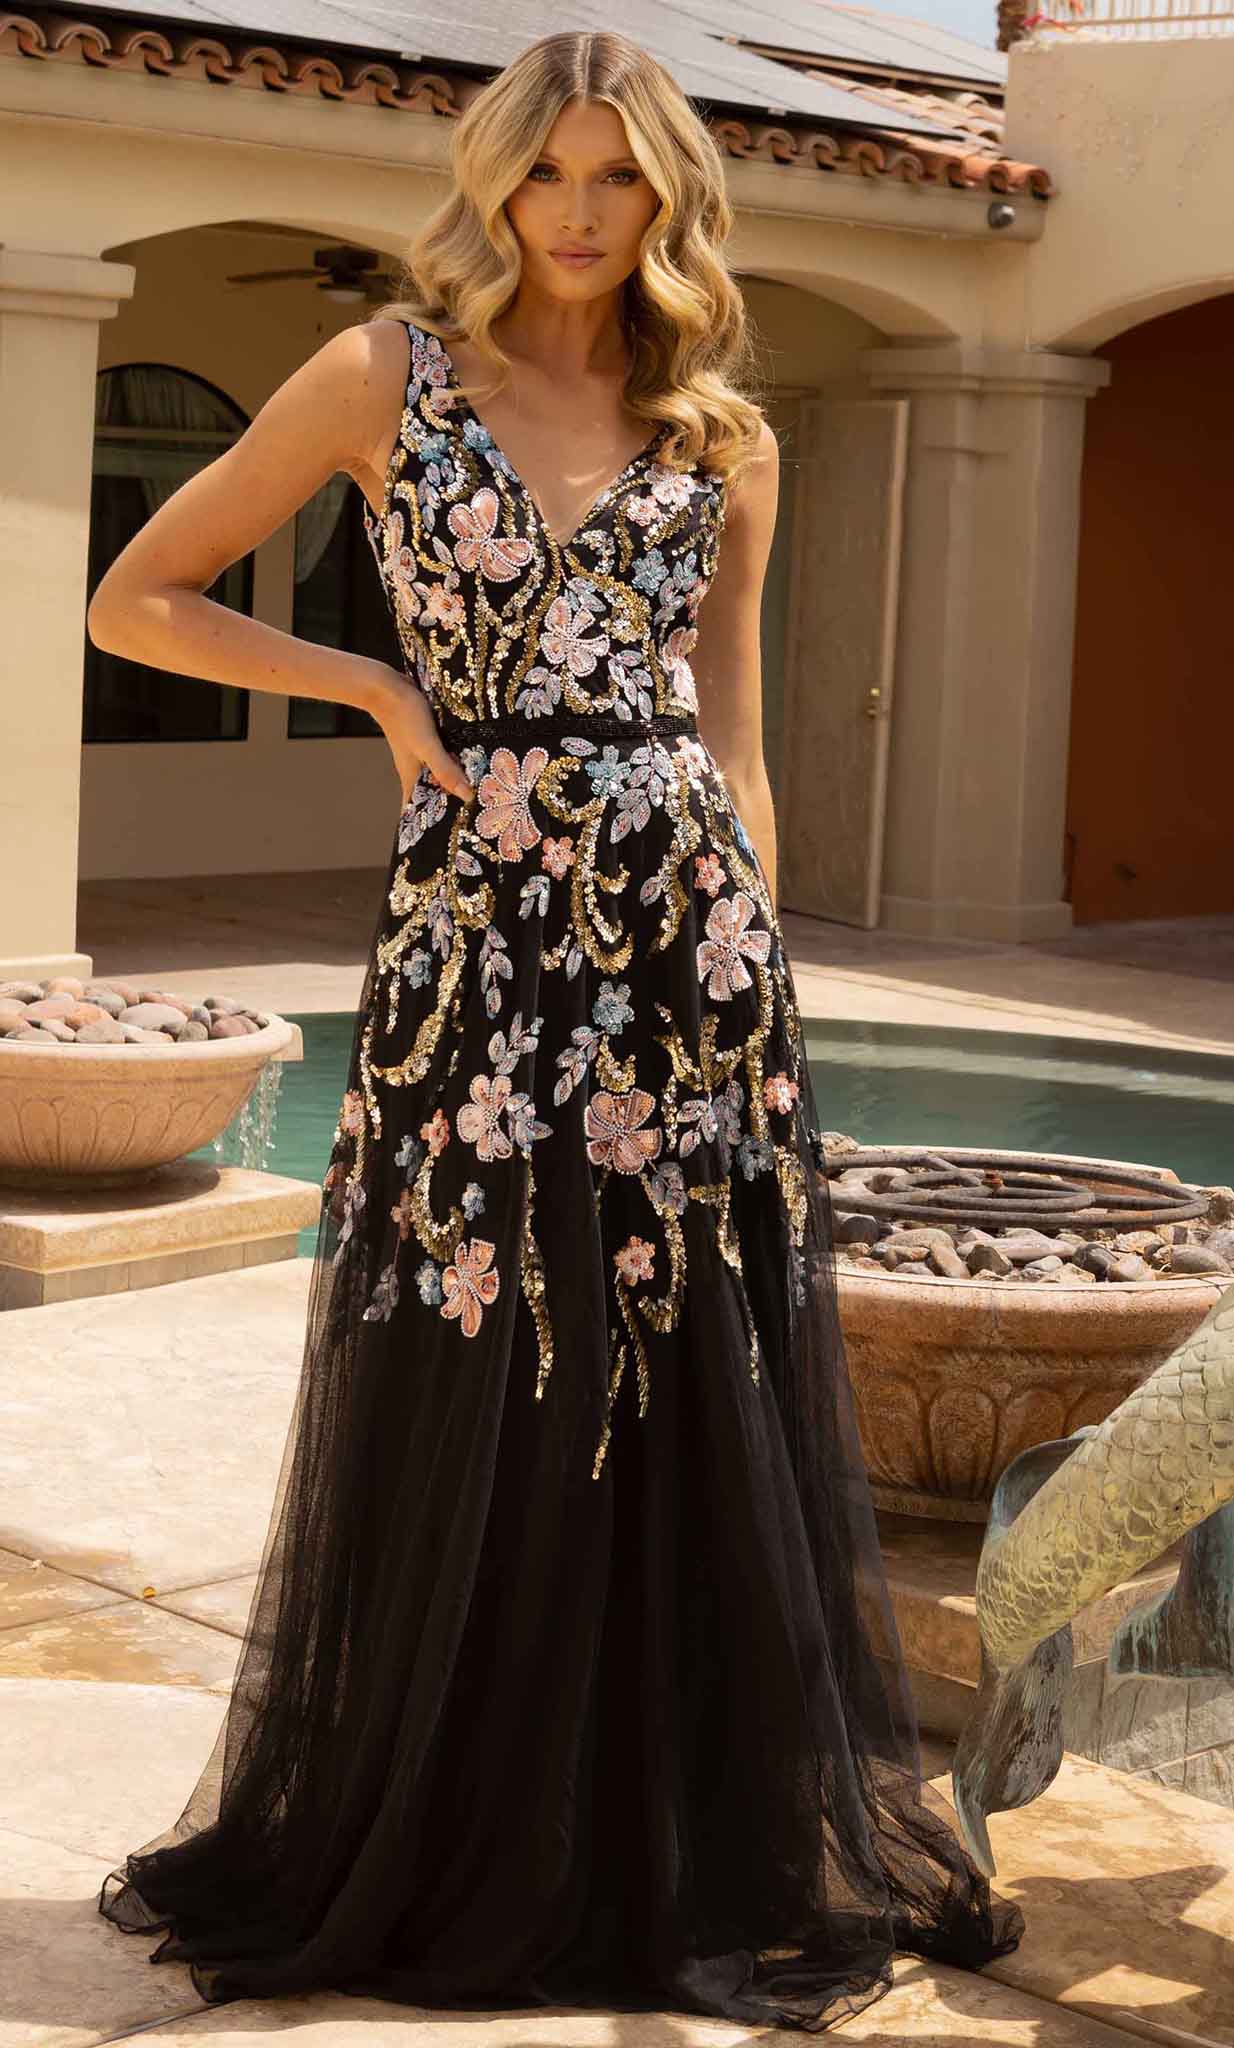 Primavera Couture 3929 - Floral Patterned Embellished Tulle Gown Prom Dresses